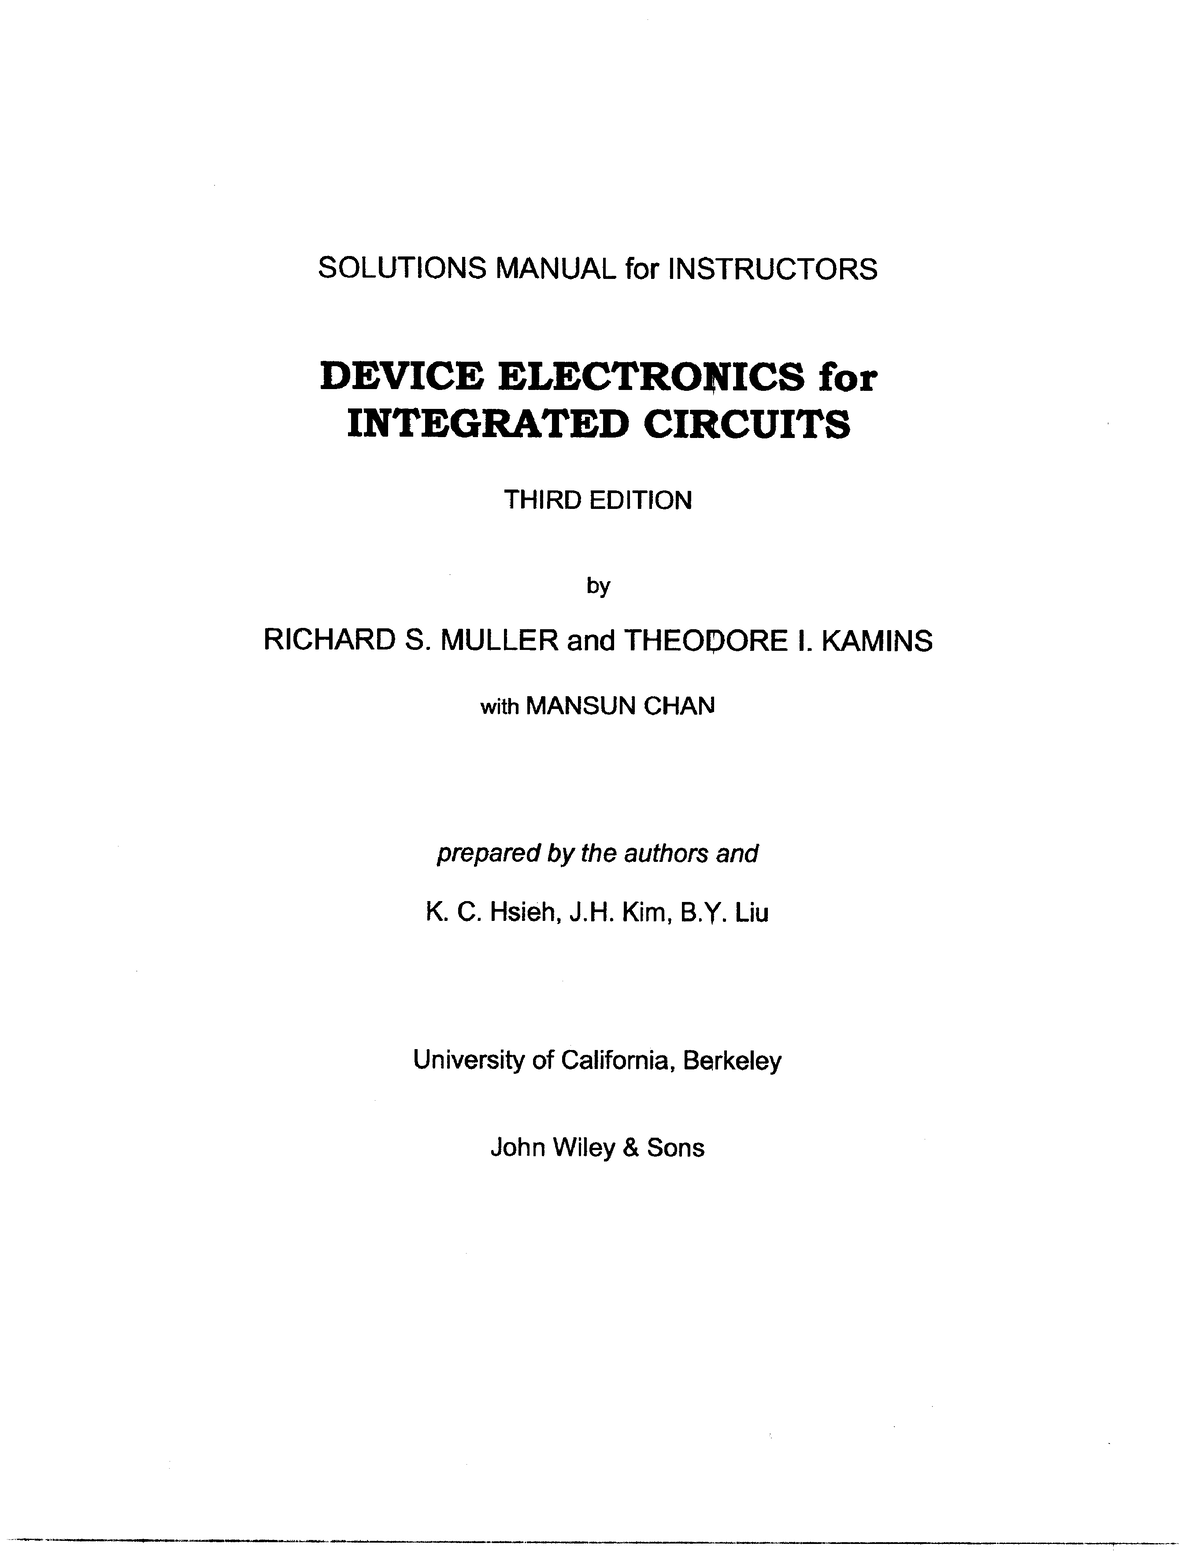 Richard S. Muller, Theodore I. Kamins - Device Electronics for